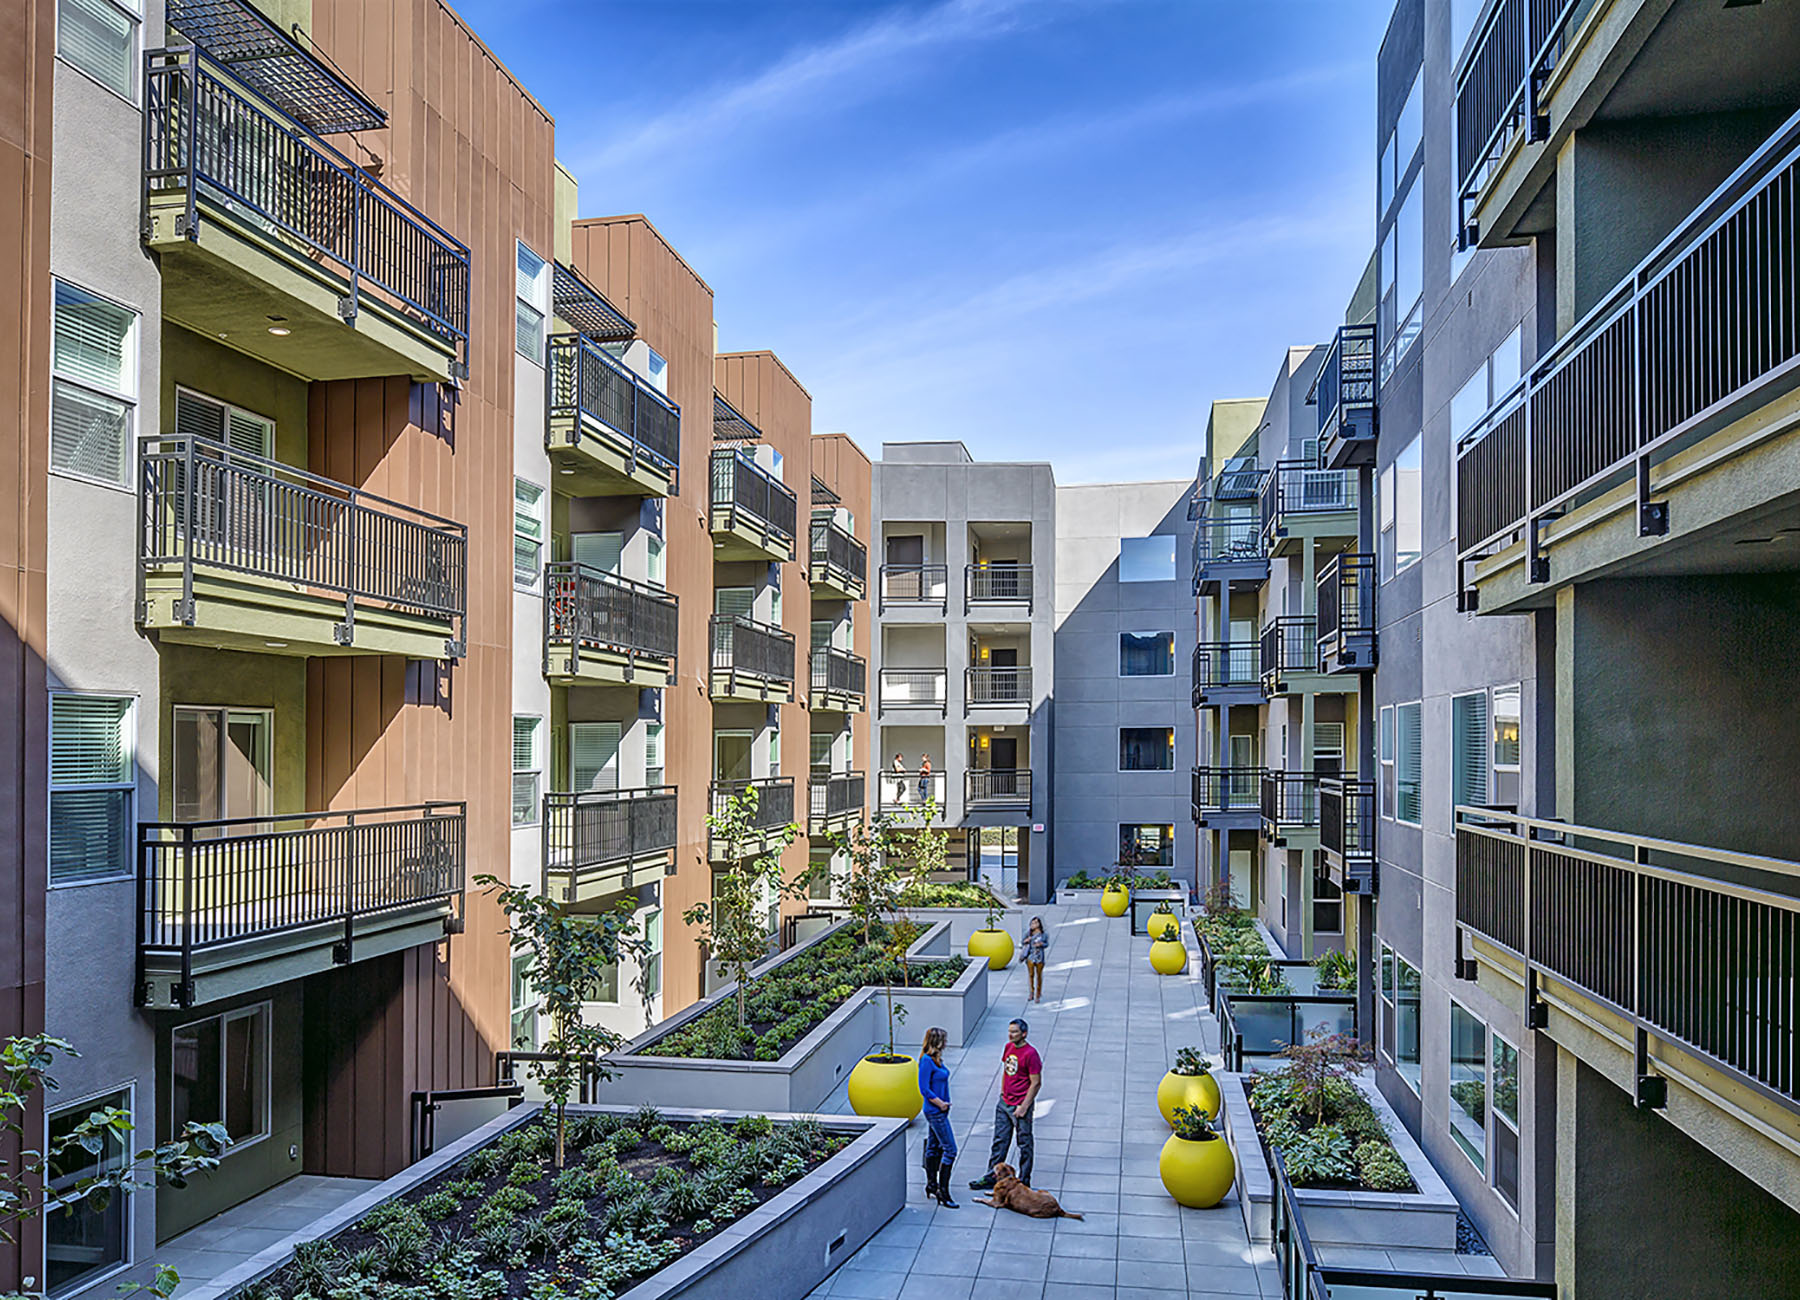 Looking down on apartment courtyard with residents and their pets mingling, yellow planters, and balconies of apartments surrounding landscaping